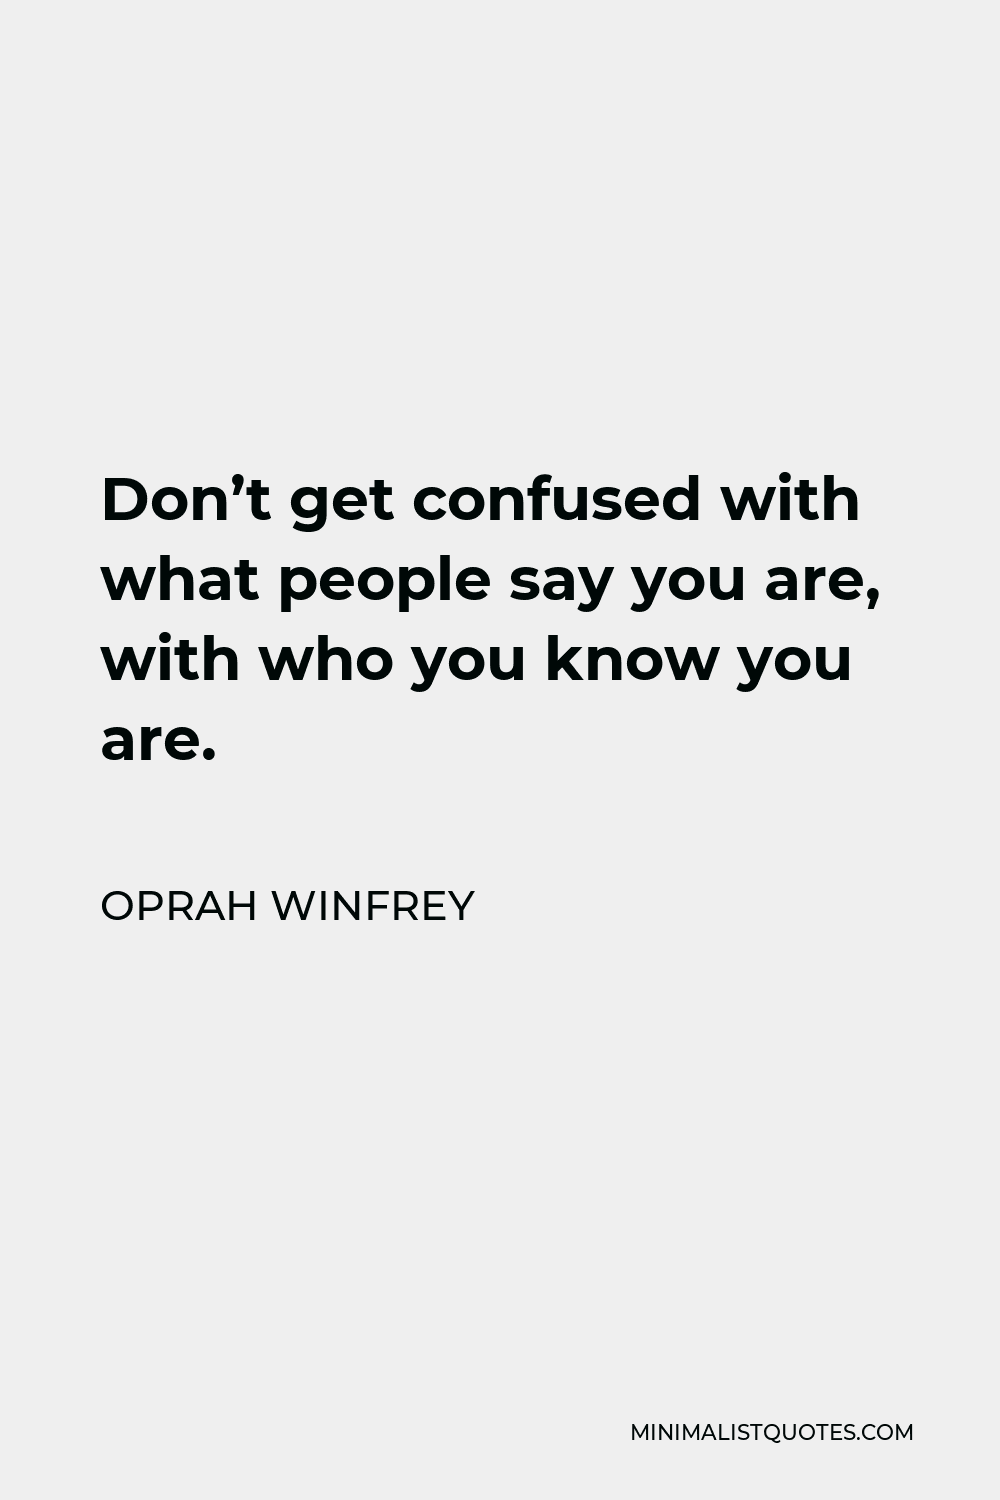 Oprah Winfrey Quote - Don’t get confused with what people say you are, with who you know you are.